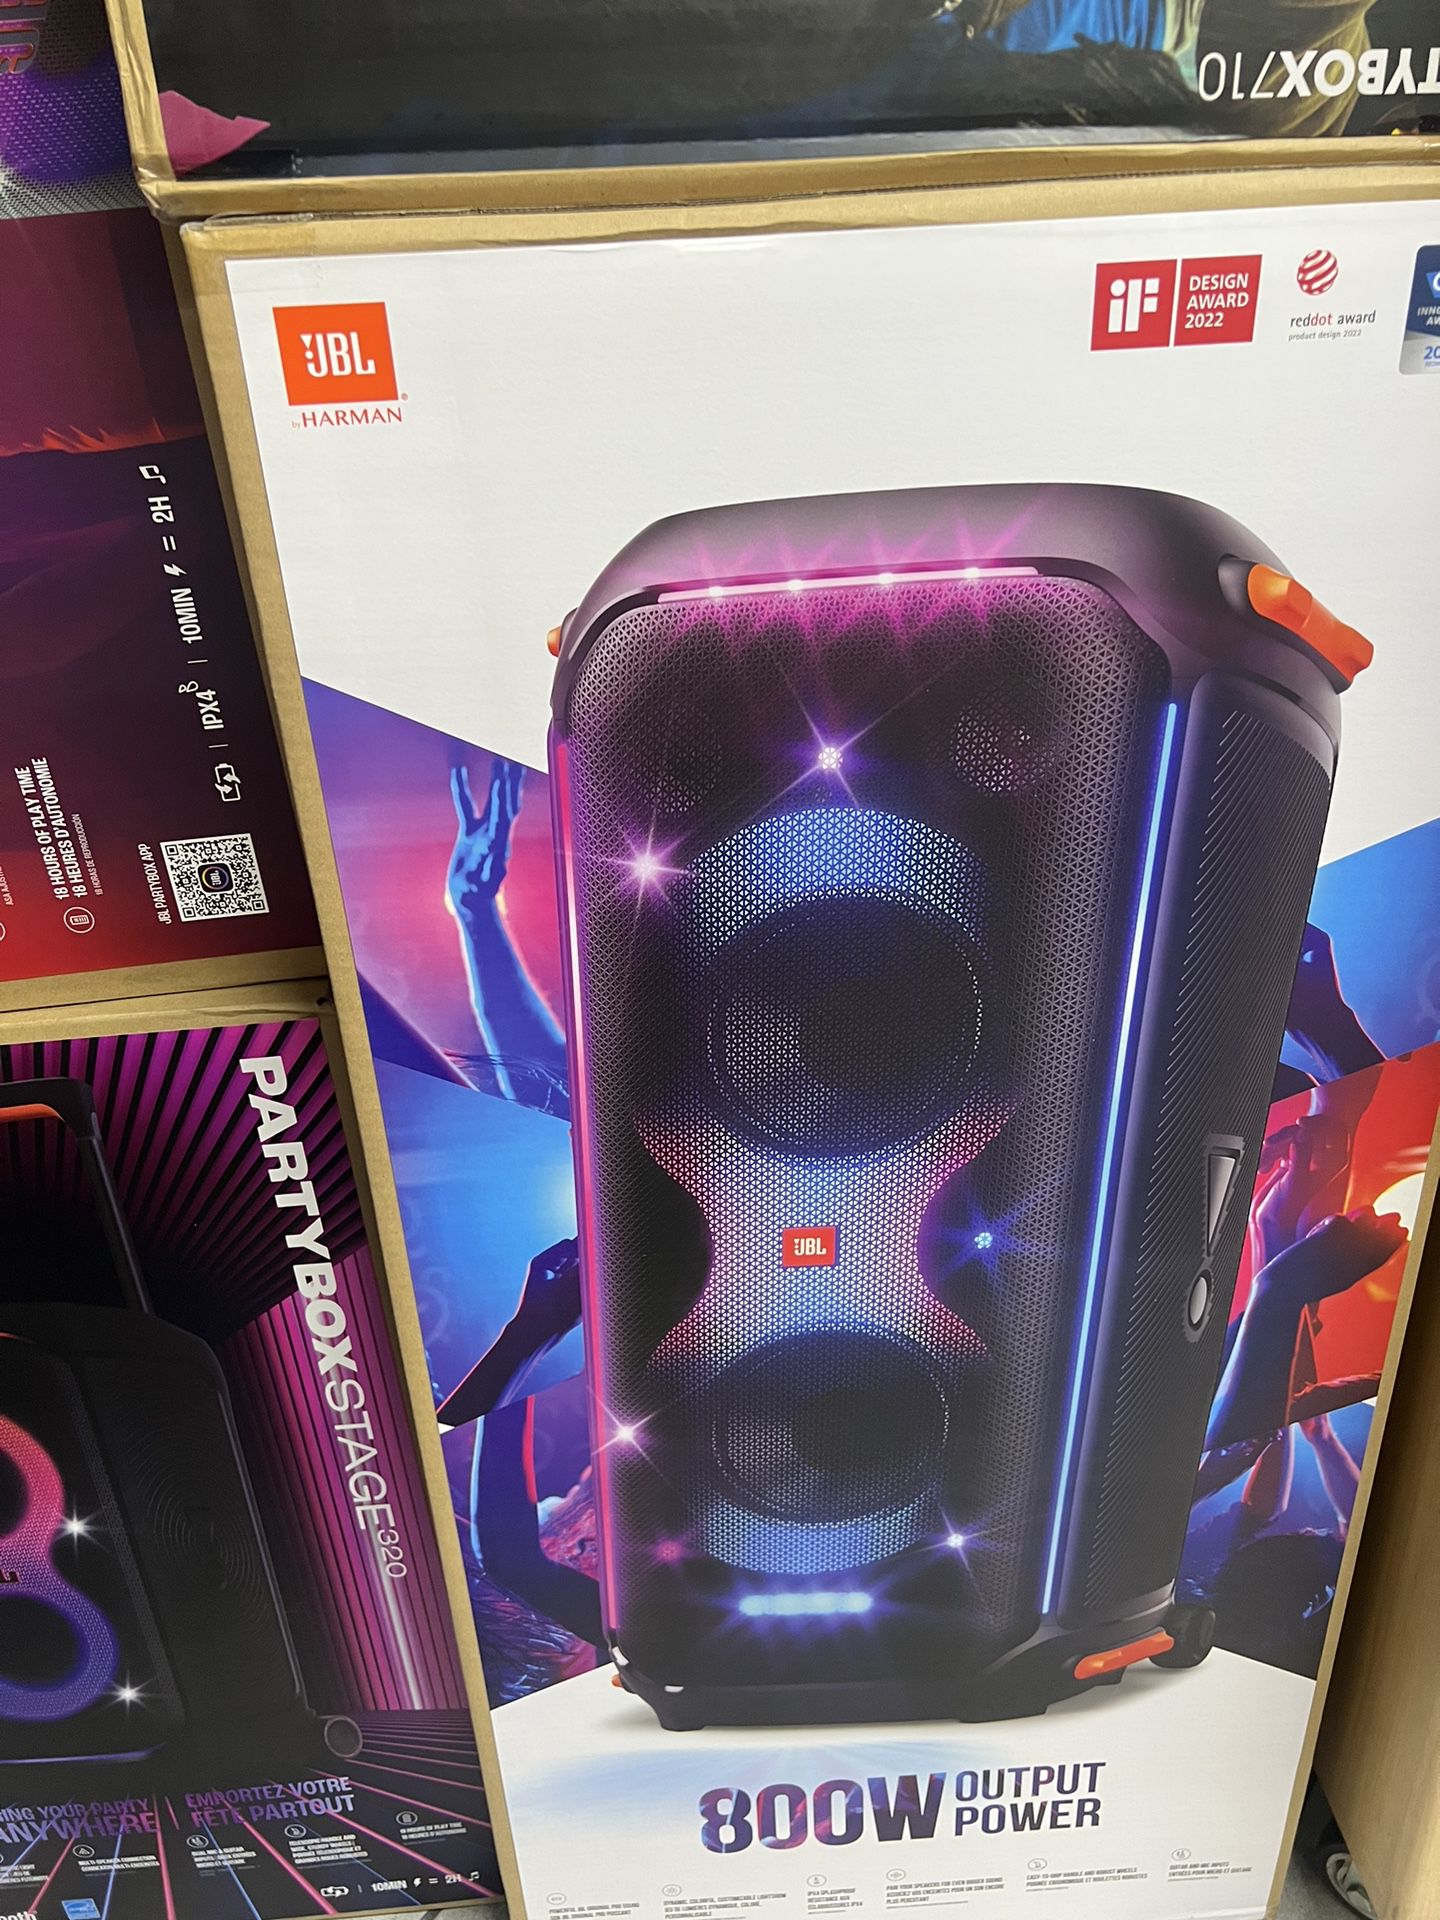 JBL Party Box 710 - 100 Days Financing Option: 13 Payments of $60 Over 13 Weeks